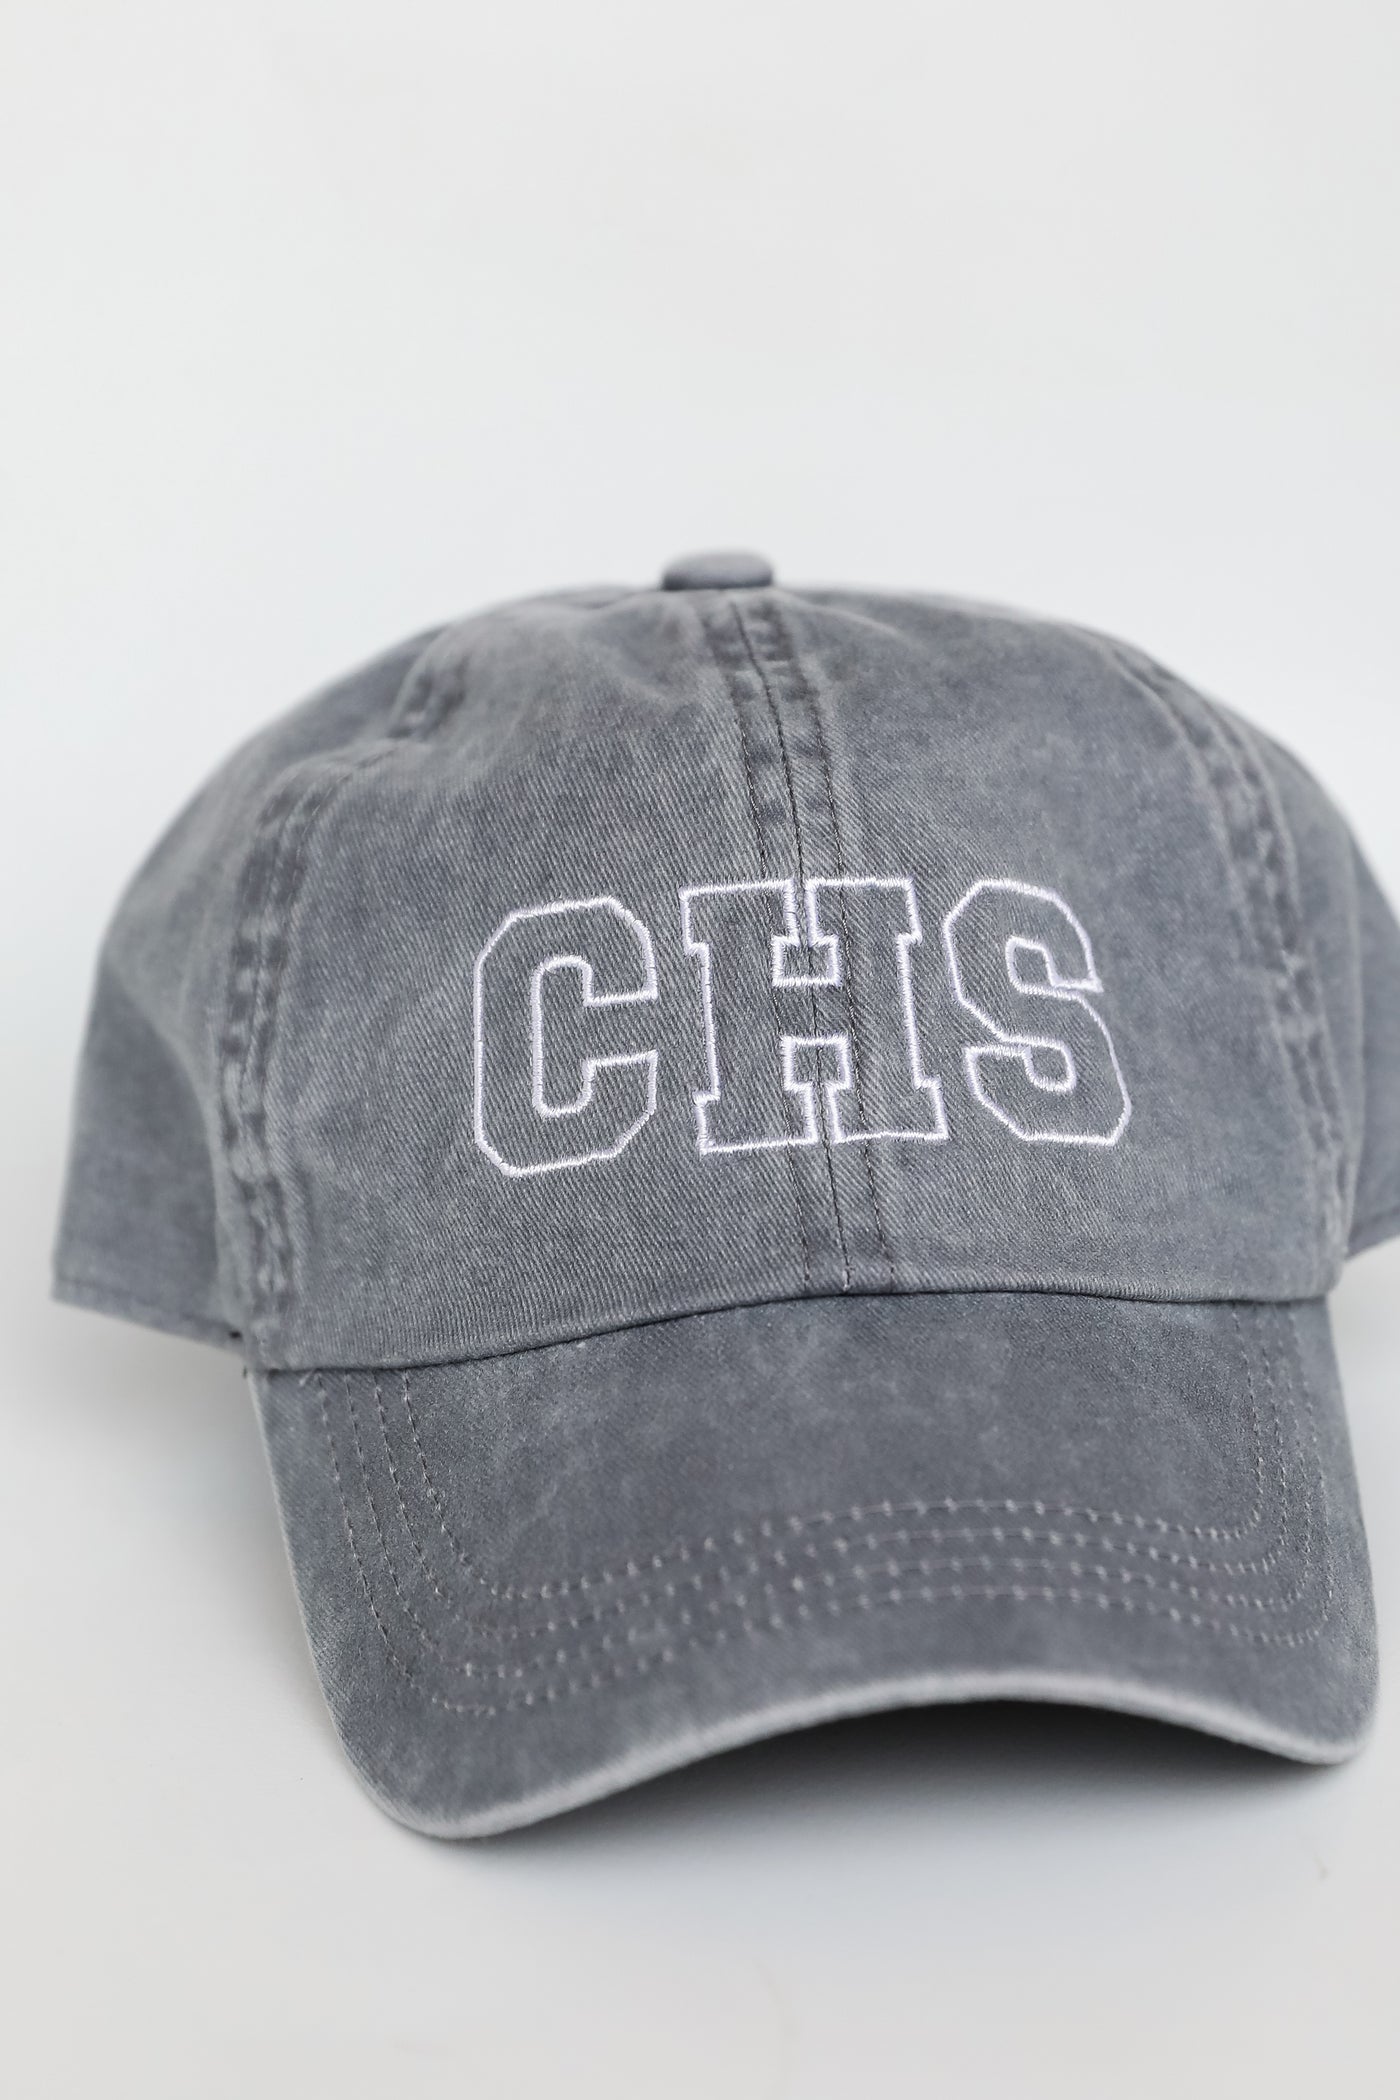 CHS Embroidered Hat flat lay